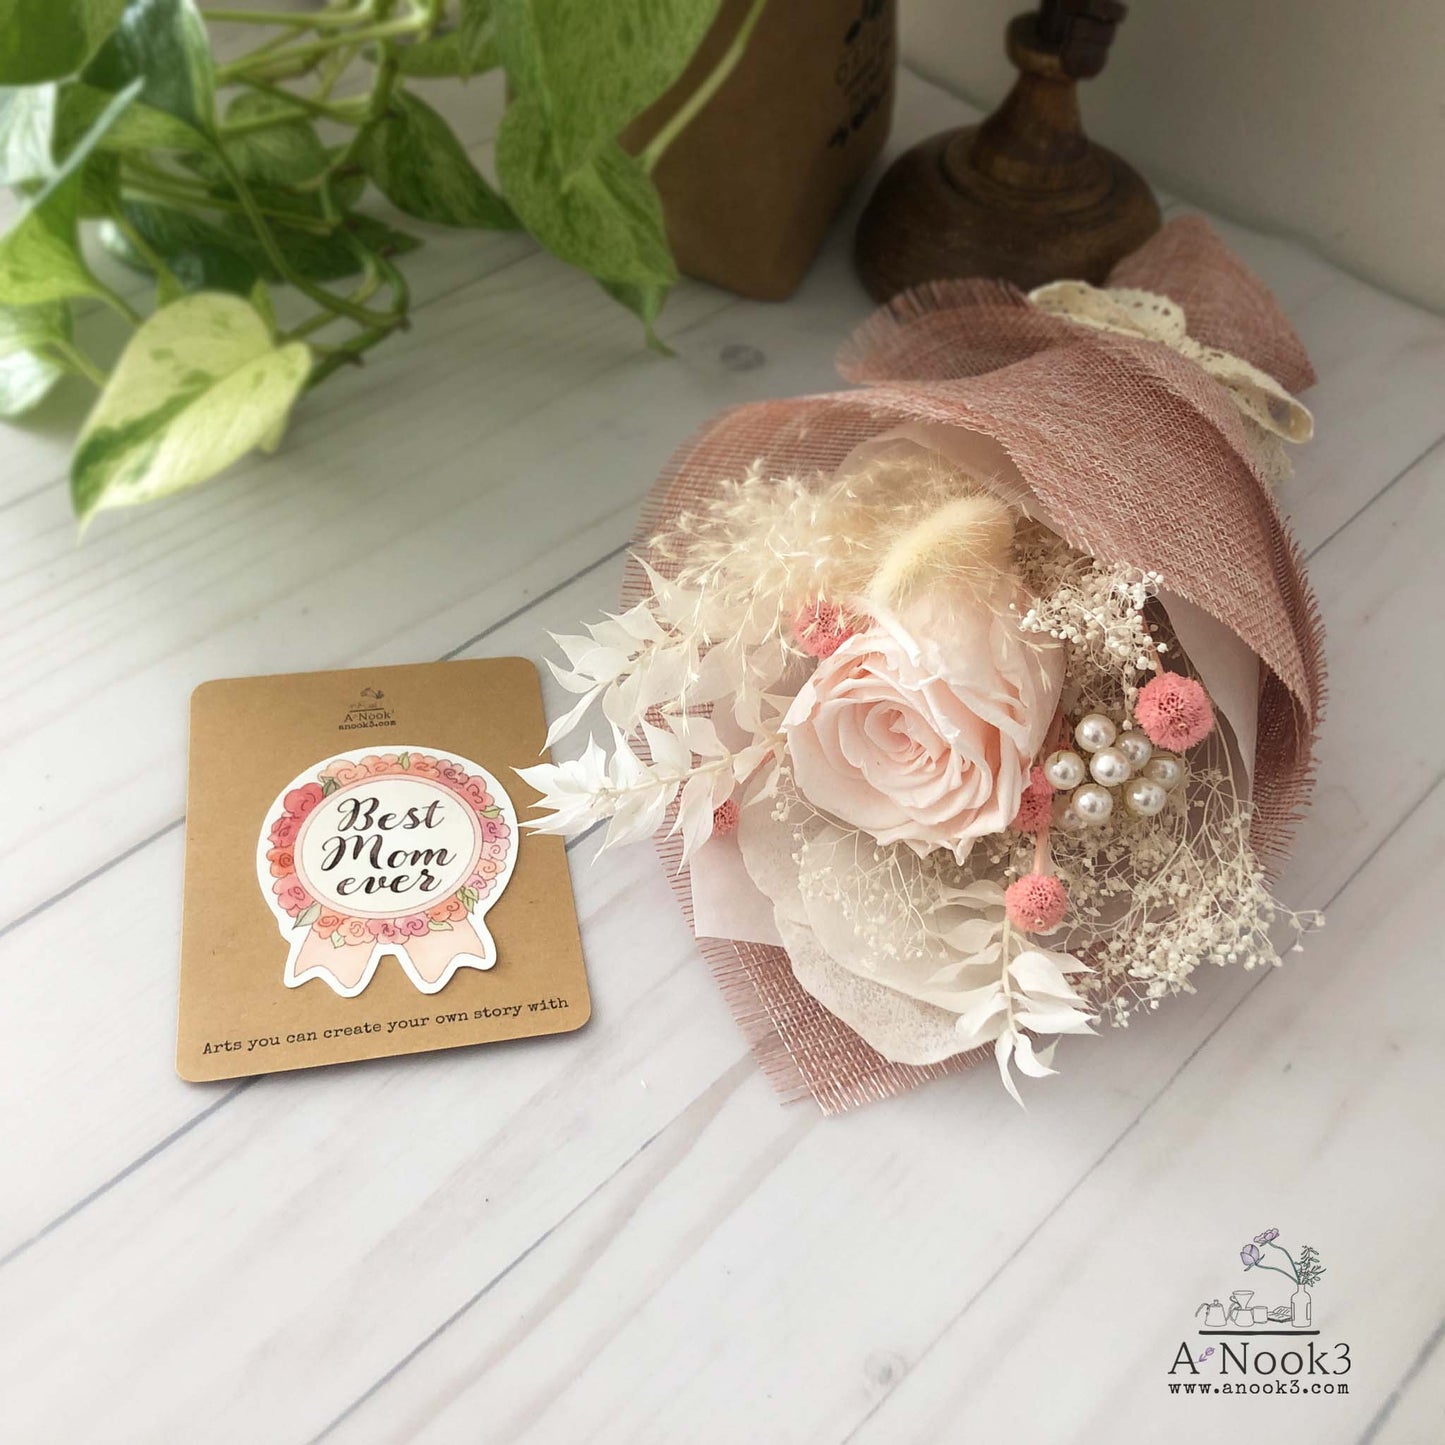 [Toronto Downtown Pickup Only] Petite Eternity Flower Bouquet Mother's Day Gift